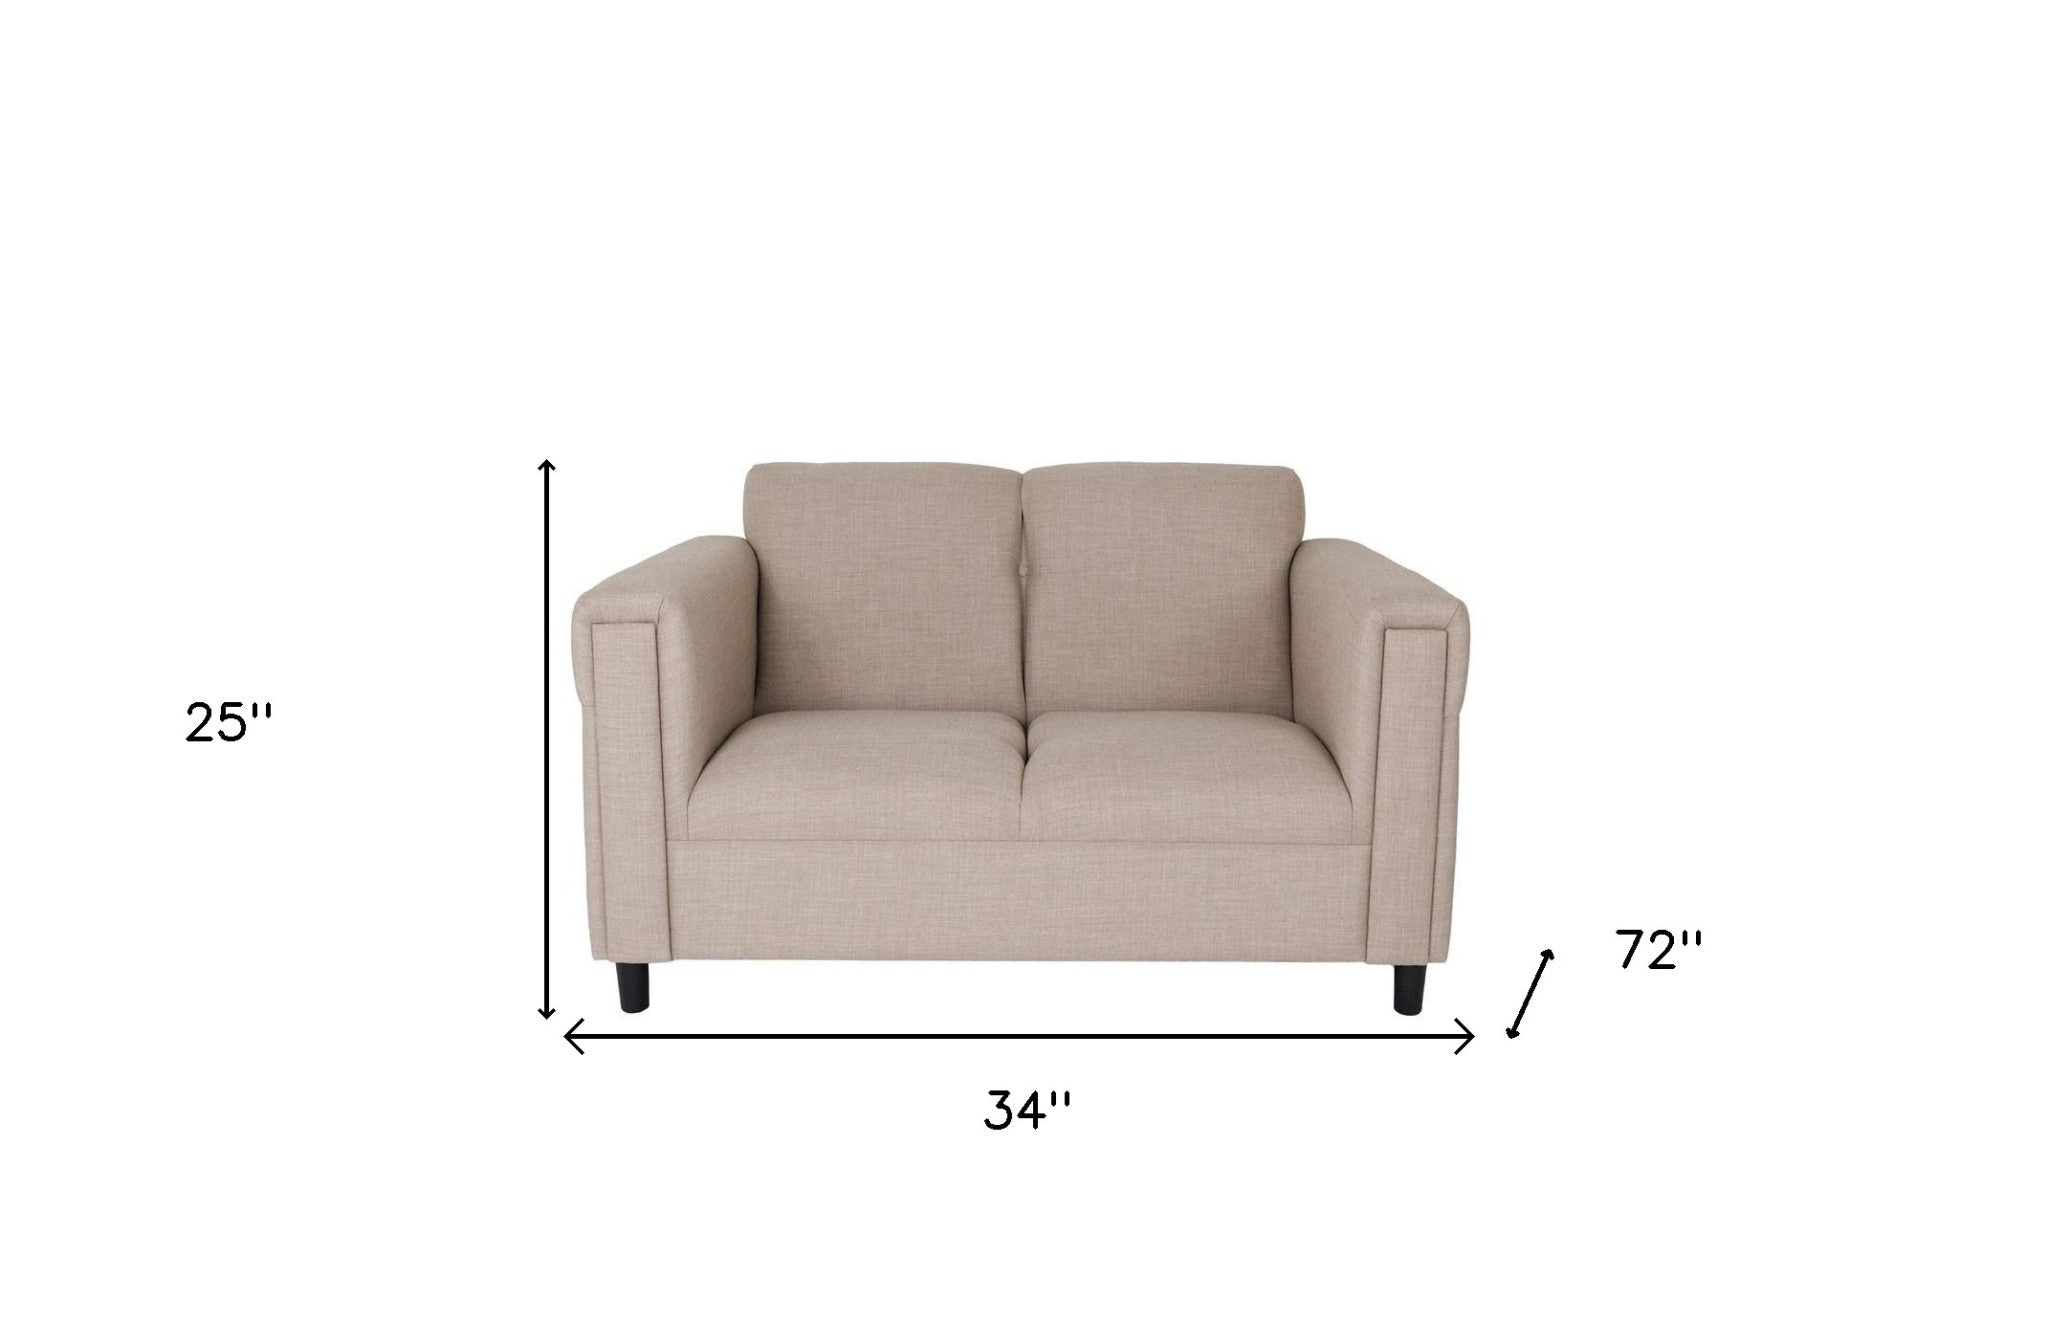 54" Deep Taupe And Black Polyester Blend Loveseat